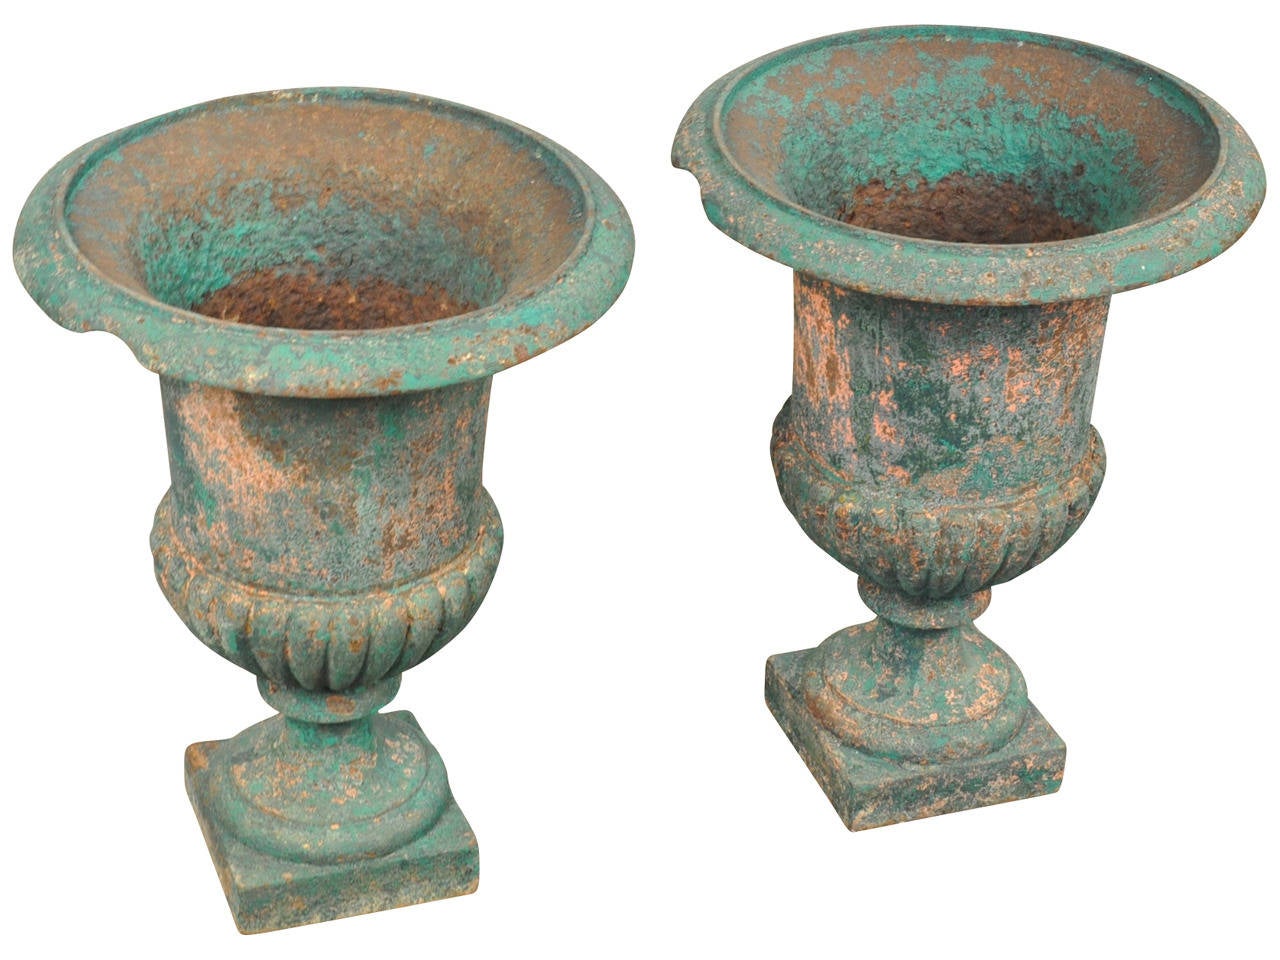 A very handsome pair of late 19th century French painted cast iron urns.  Wonderful indoors or out.  They are also wonderful as bases for occasional talbes, side tables or cocktail tables.